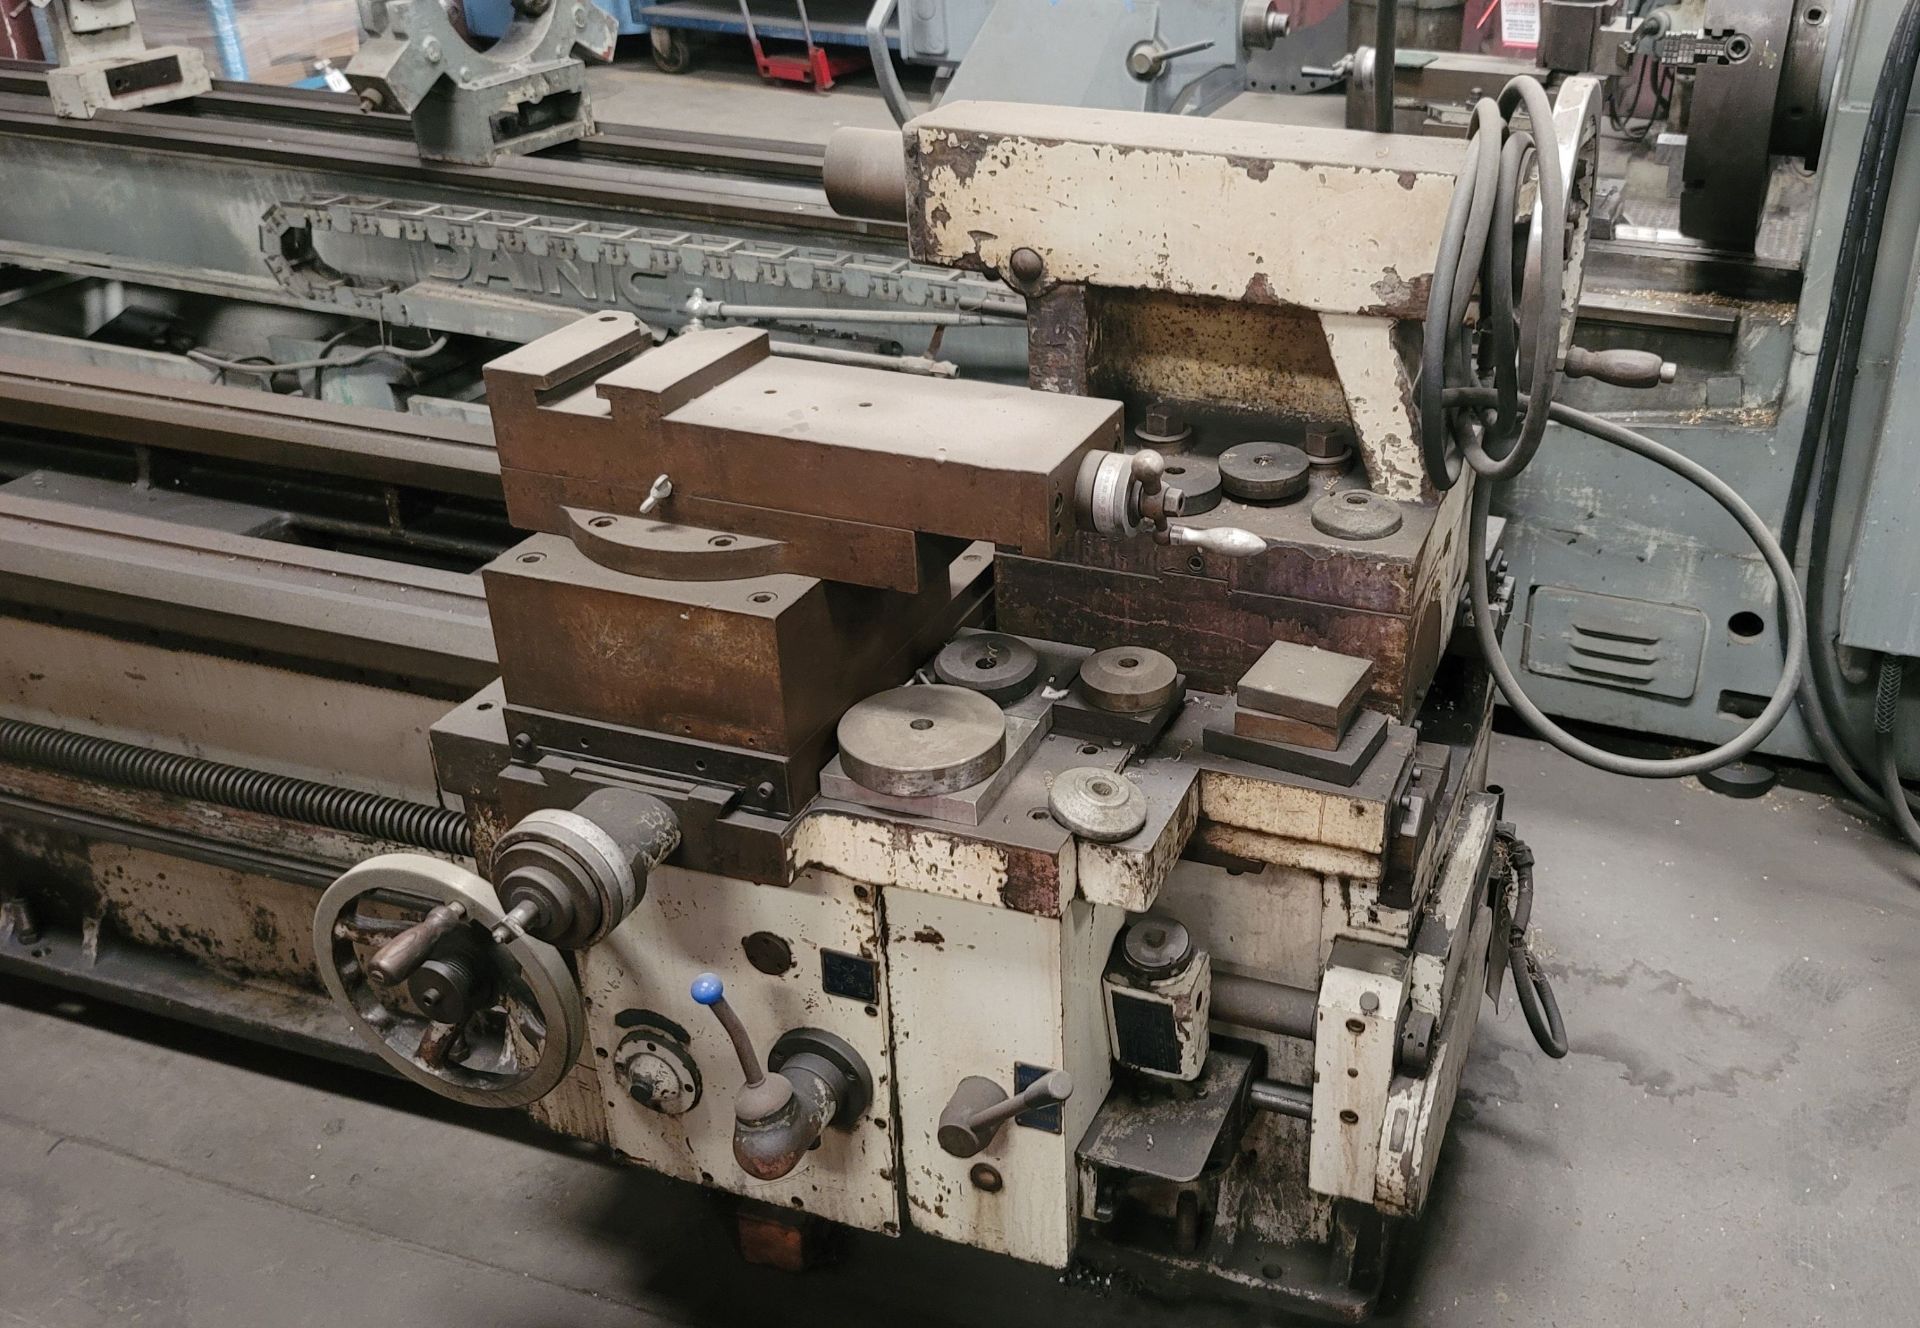 CADILLAC GAP BED ENGINE LATHE, MODEL 32120, 32" X 120", 42" SWING IN GAP, TAILSTOCK, S/N 267014 - Image 6 of 10